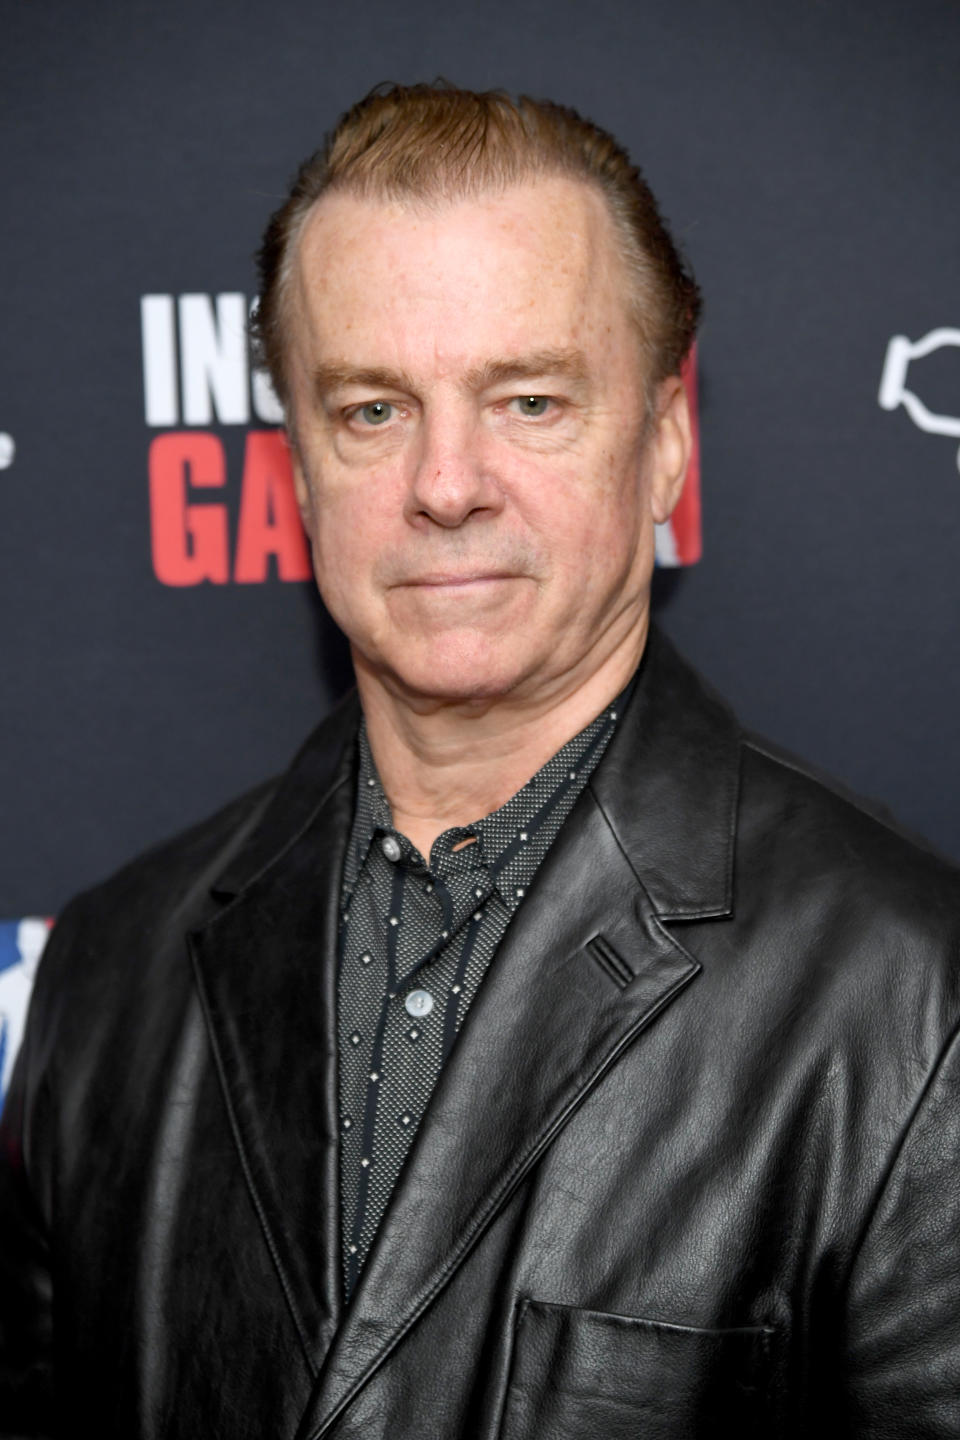 NEW YORK, NEW YORK - OCTOBER 30:  Michael O'Keefe attends the New York premiere of "Inside Game" at Metrograph on October 30, 2019 in New York City. (Photo by Dimitrios Kambouris/Getty Images)